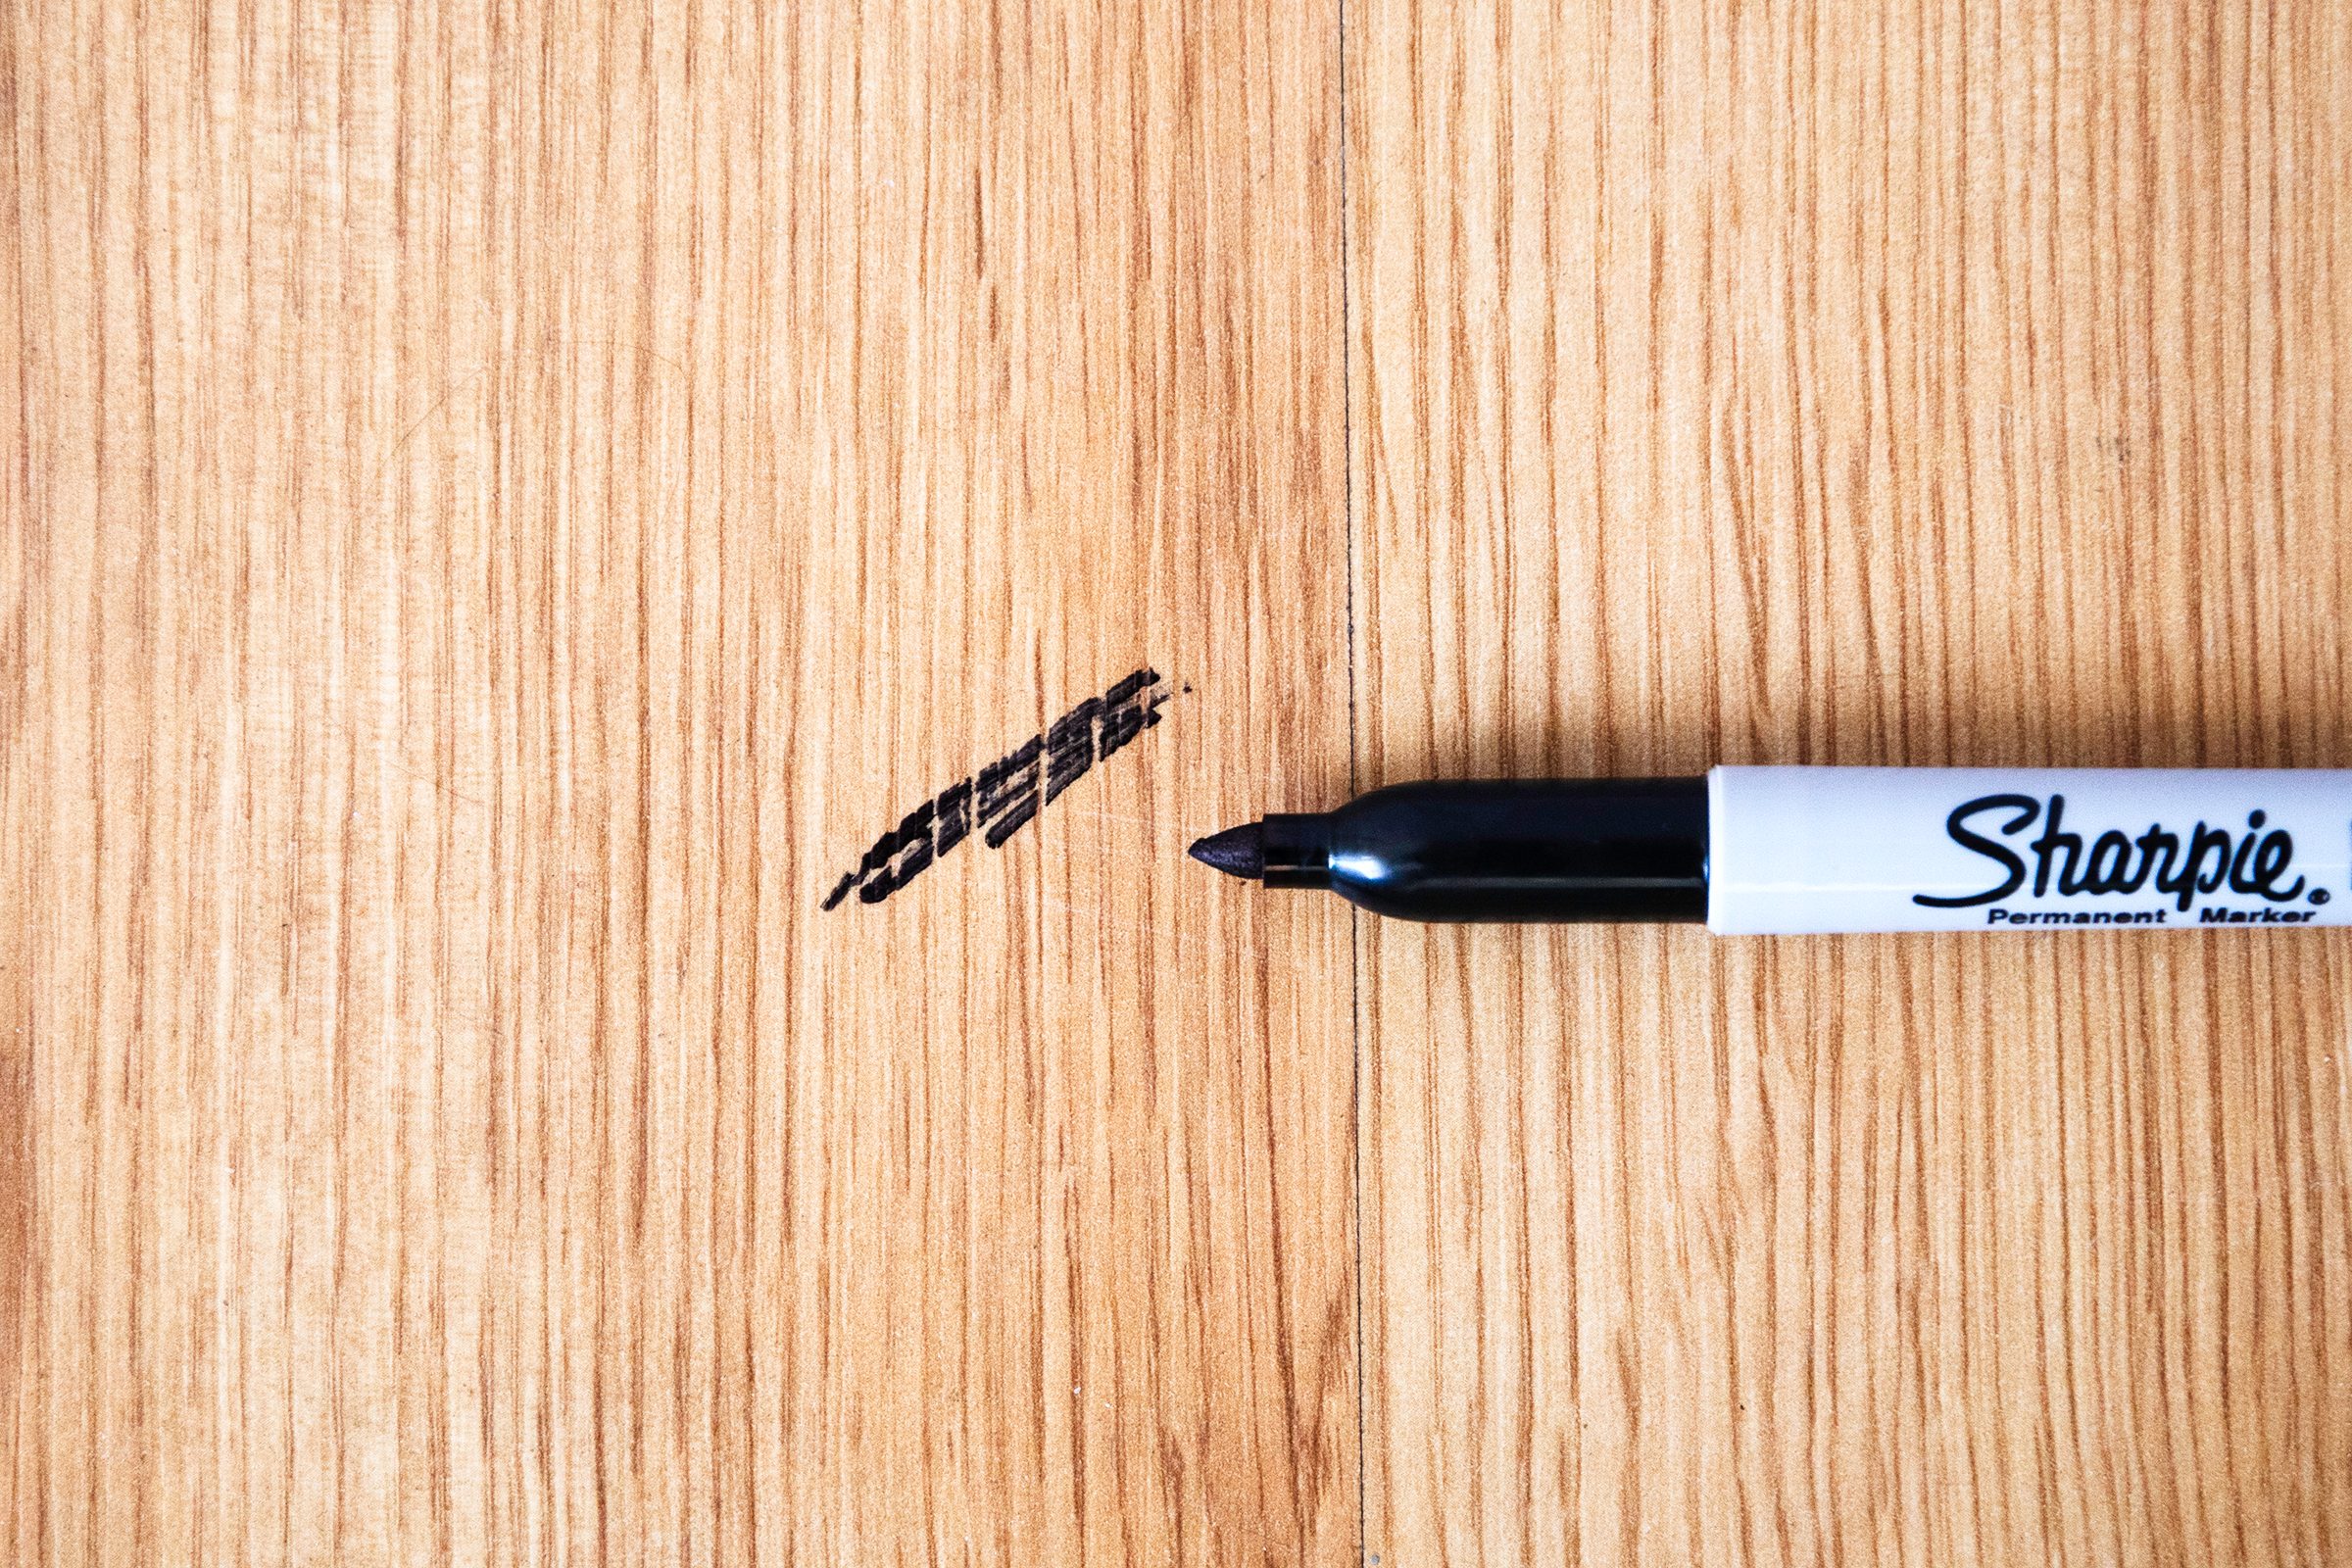 How to Remove Permanent Marker from Metal - Tips and Tricks